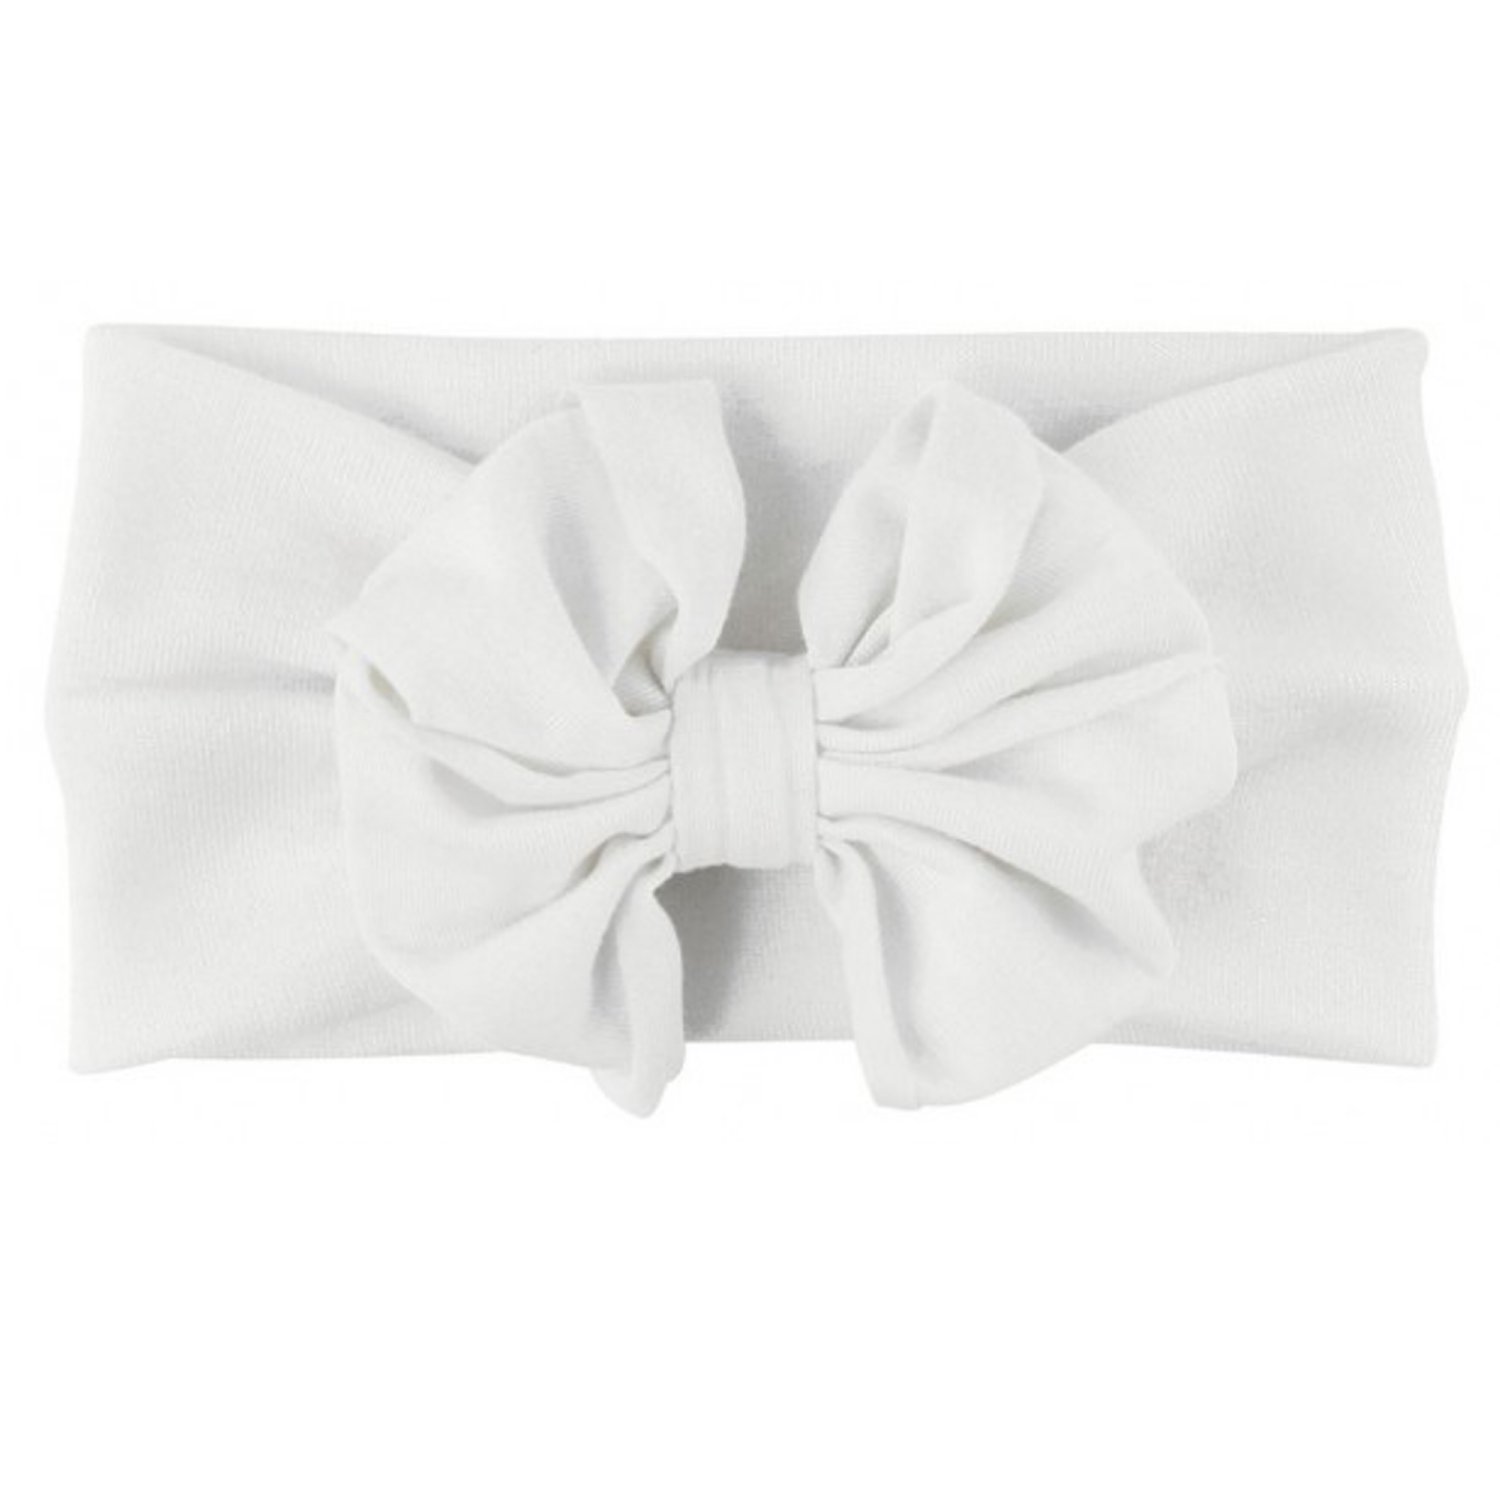  Hipcheer White Headband and Hair Bows Holder for Baby